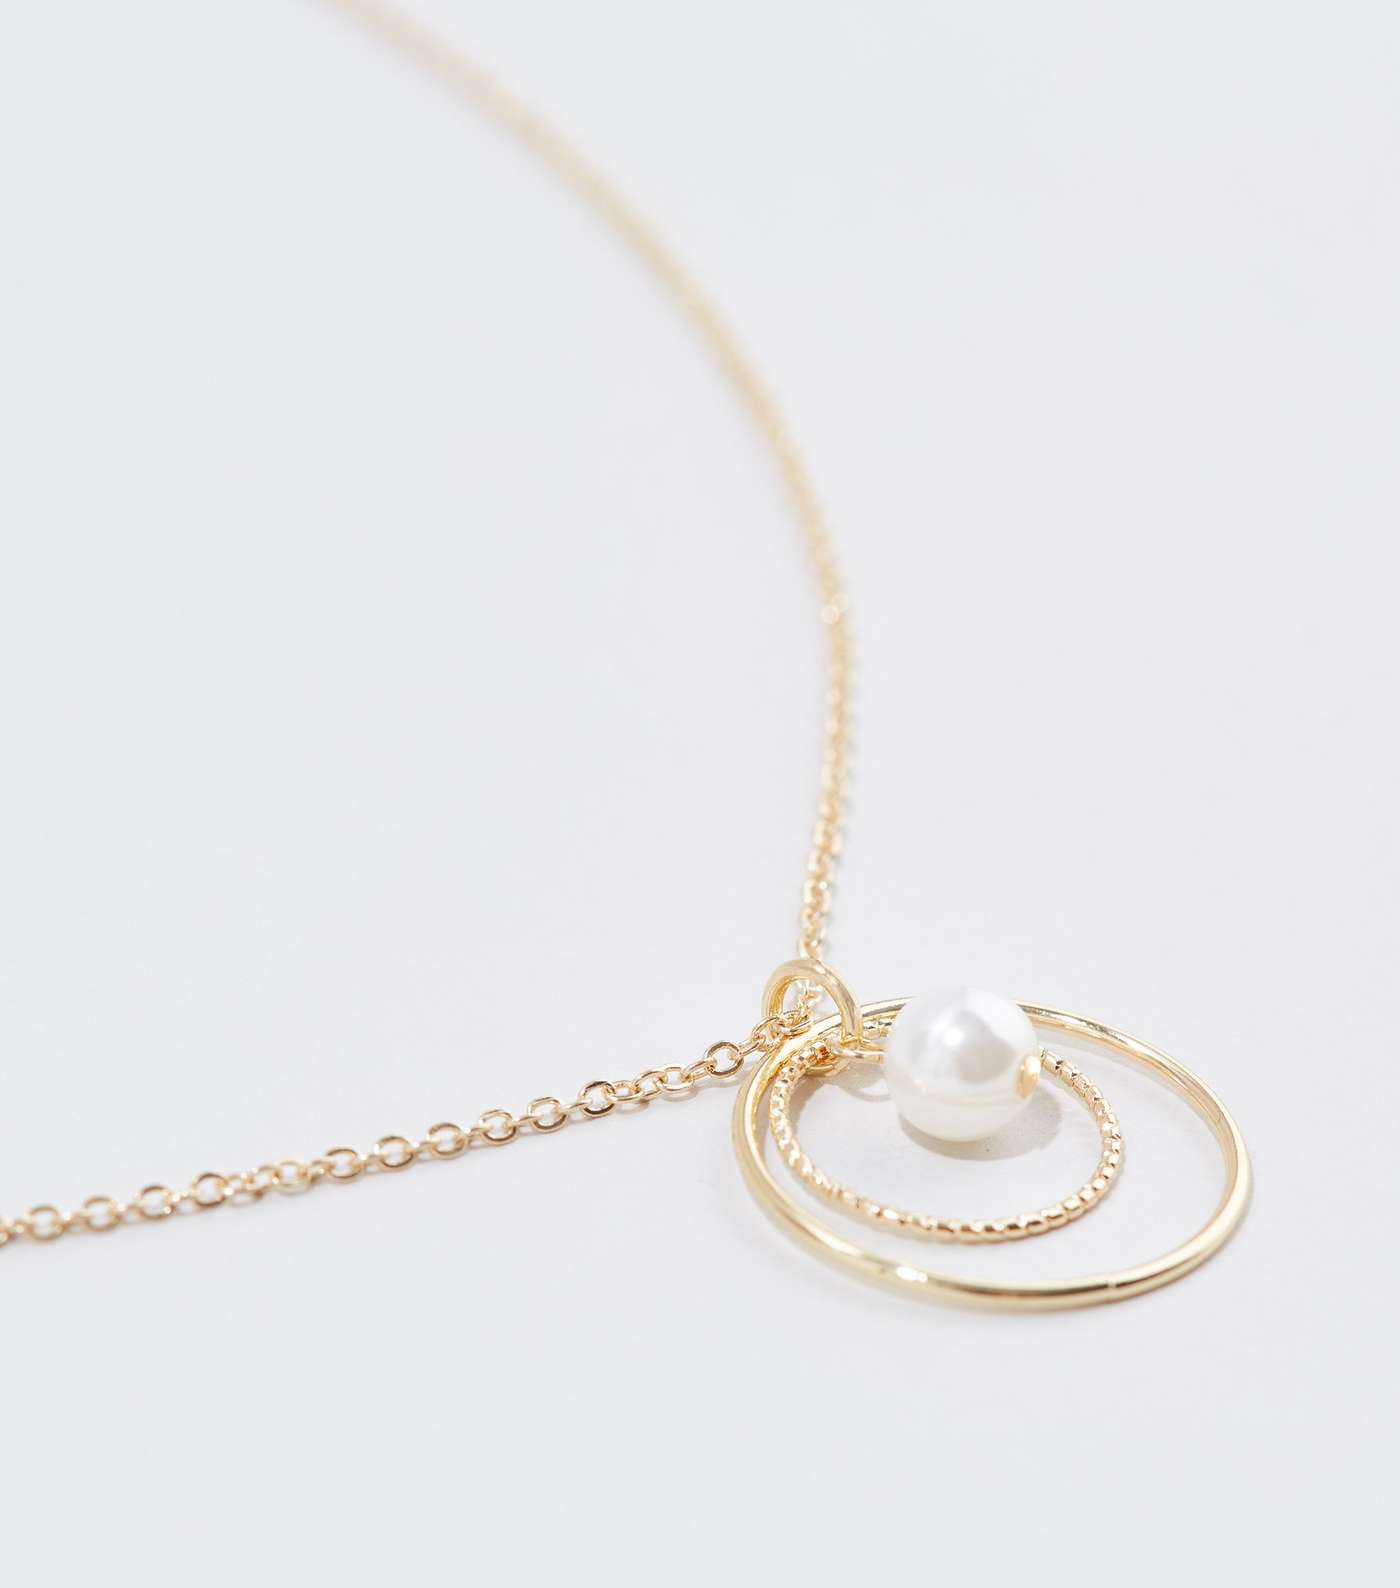 Gold Double Circle Faux Pearl Pendant Necklace Image 3